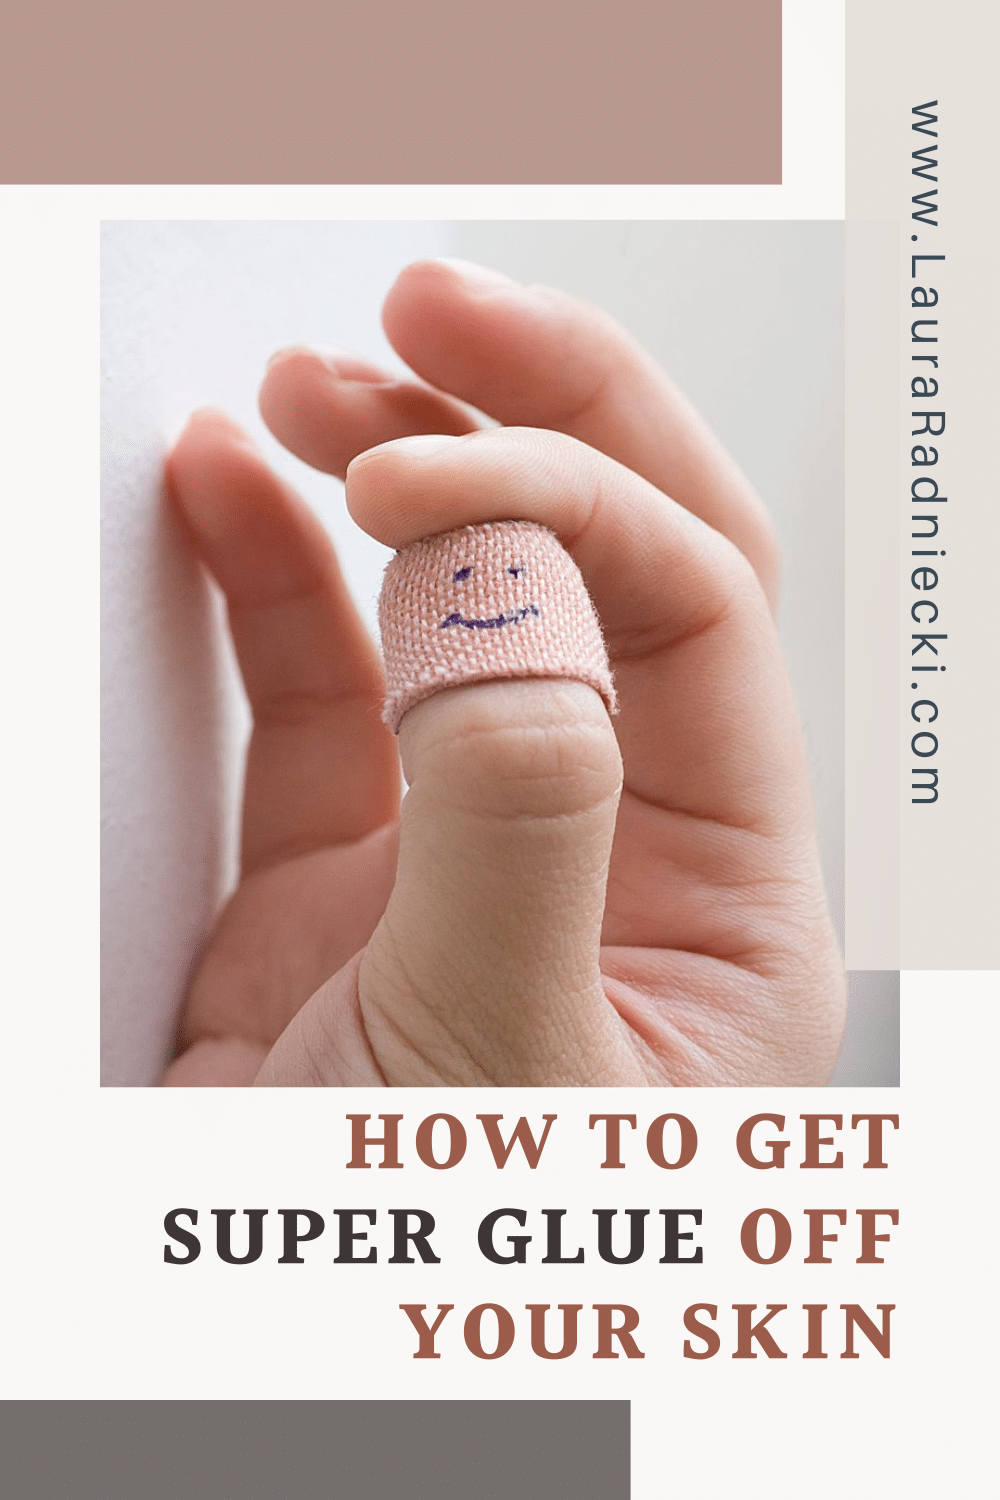 How to get super glue off skin, fingers, hands. How to remove super glue from your skin